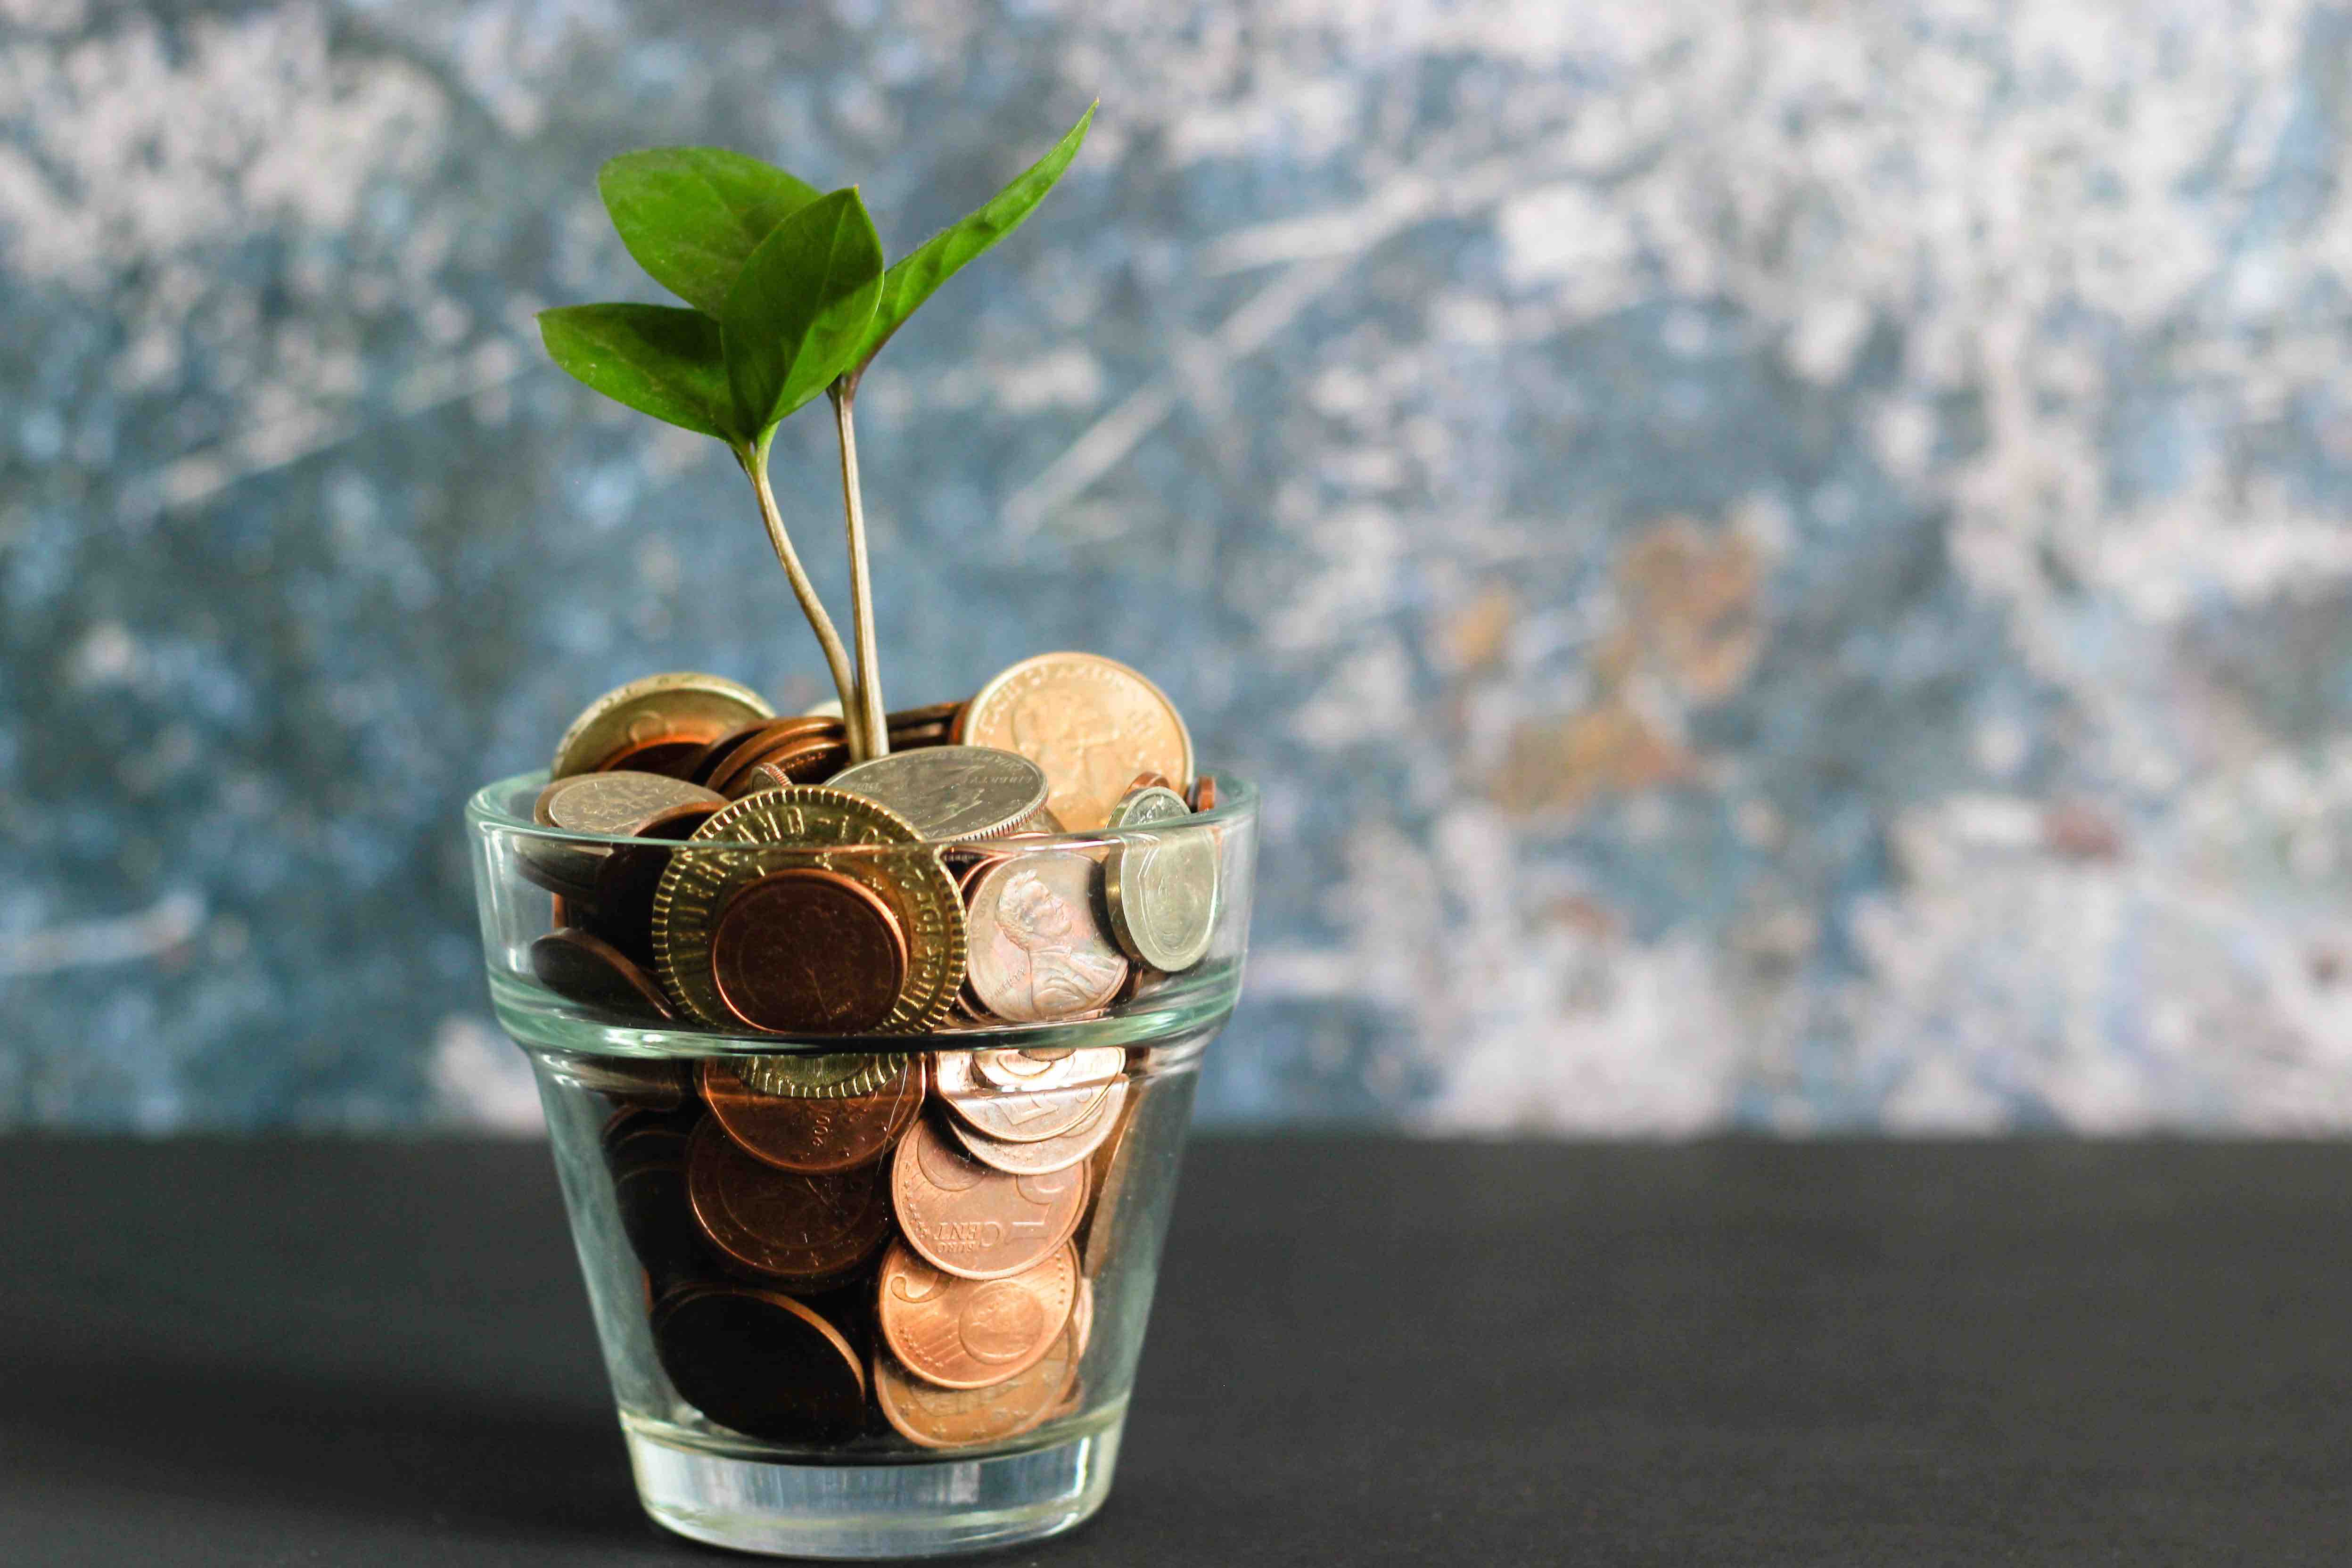 A green leaf growing out of a cup of coins on a desk as inspiration to raise money for missionary work